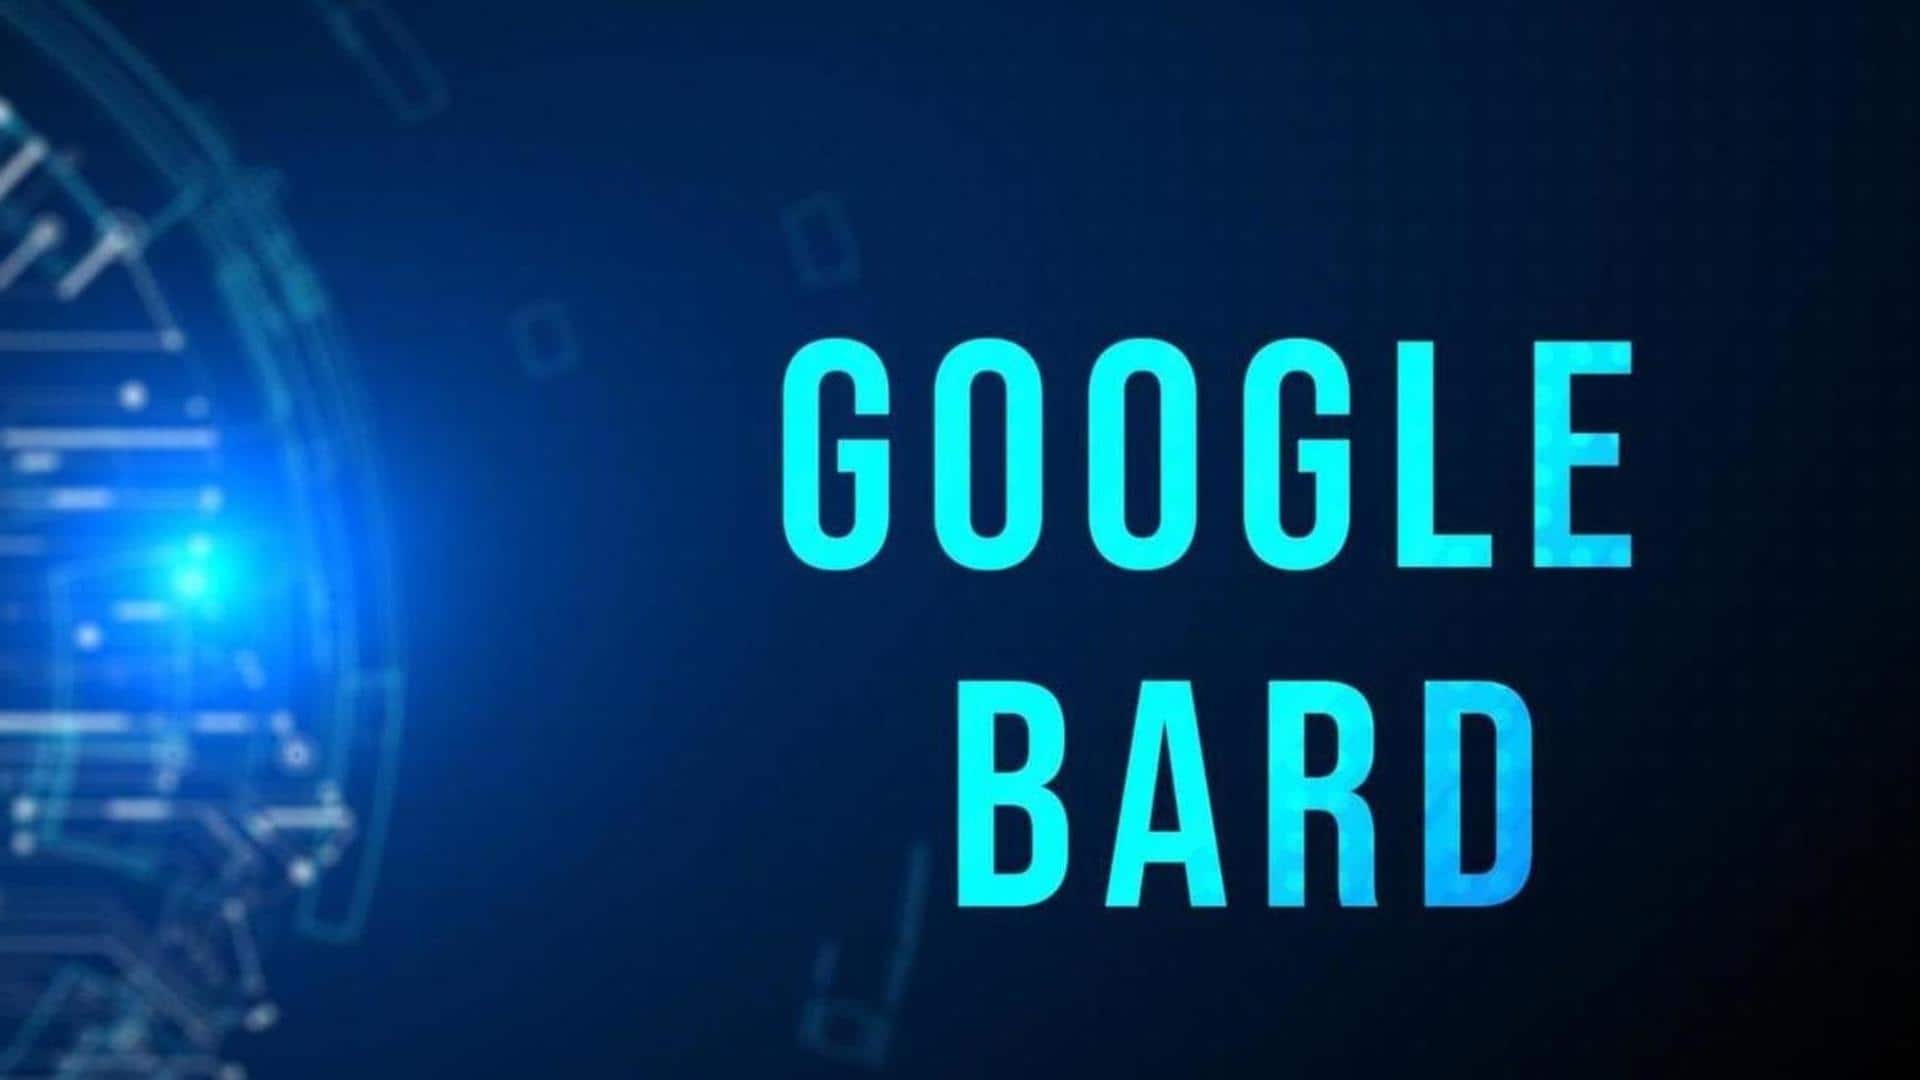 Bard in Google Messages: Are AI-generated messages coming soon